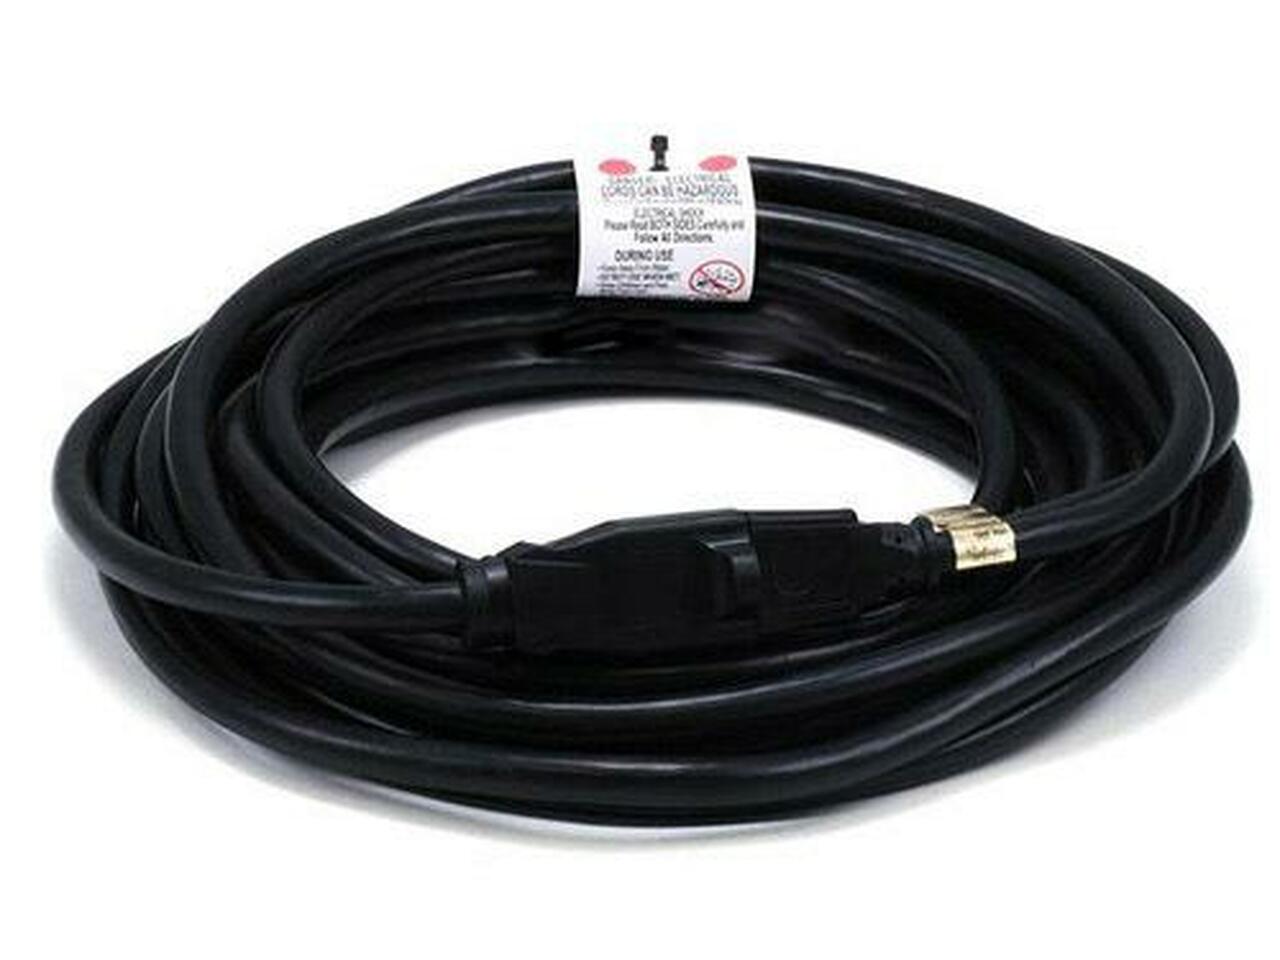 25 foot Power Extension Cord